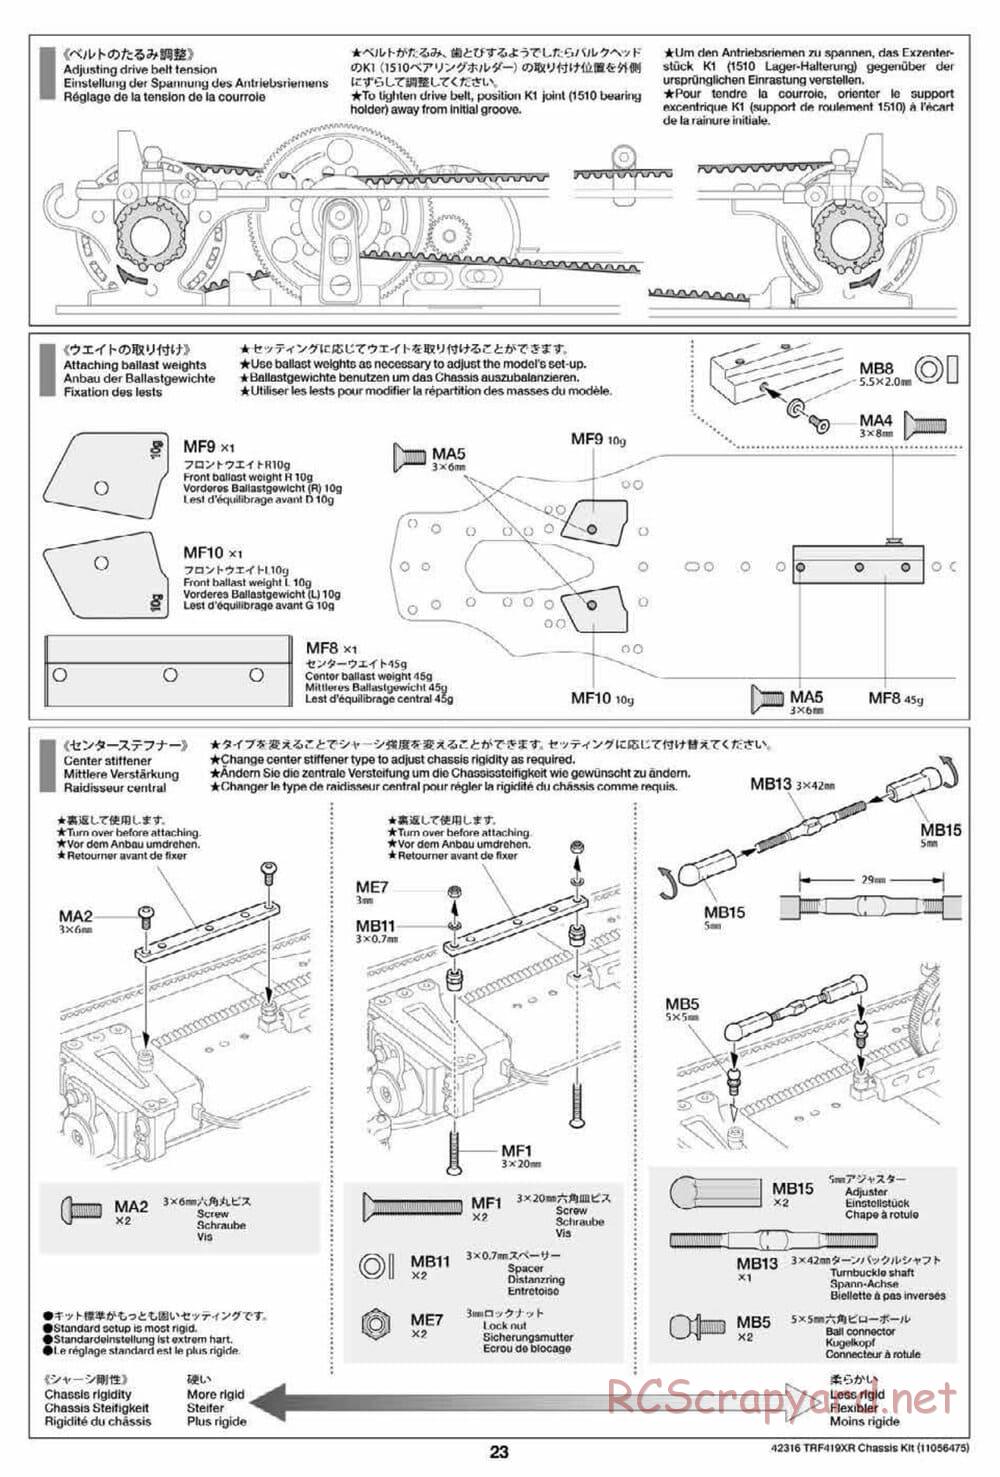 Tamiya - TRF419XR Chassis - Manual - Page 23